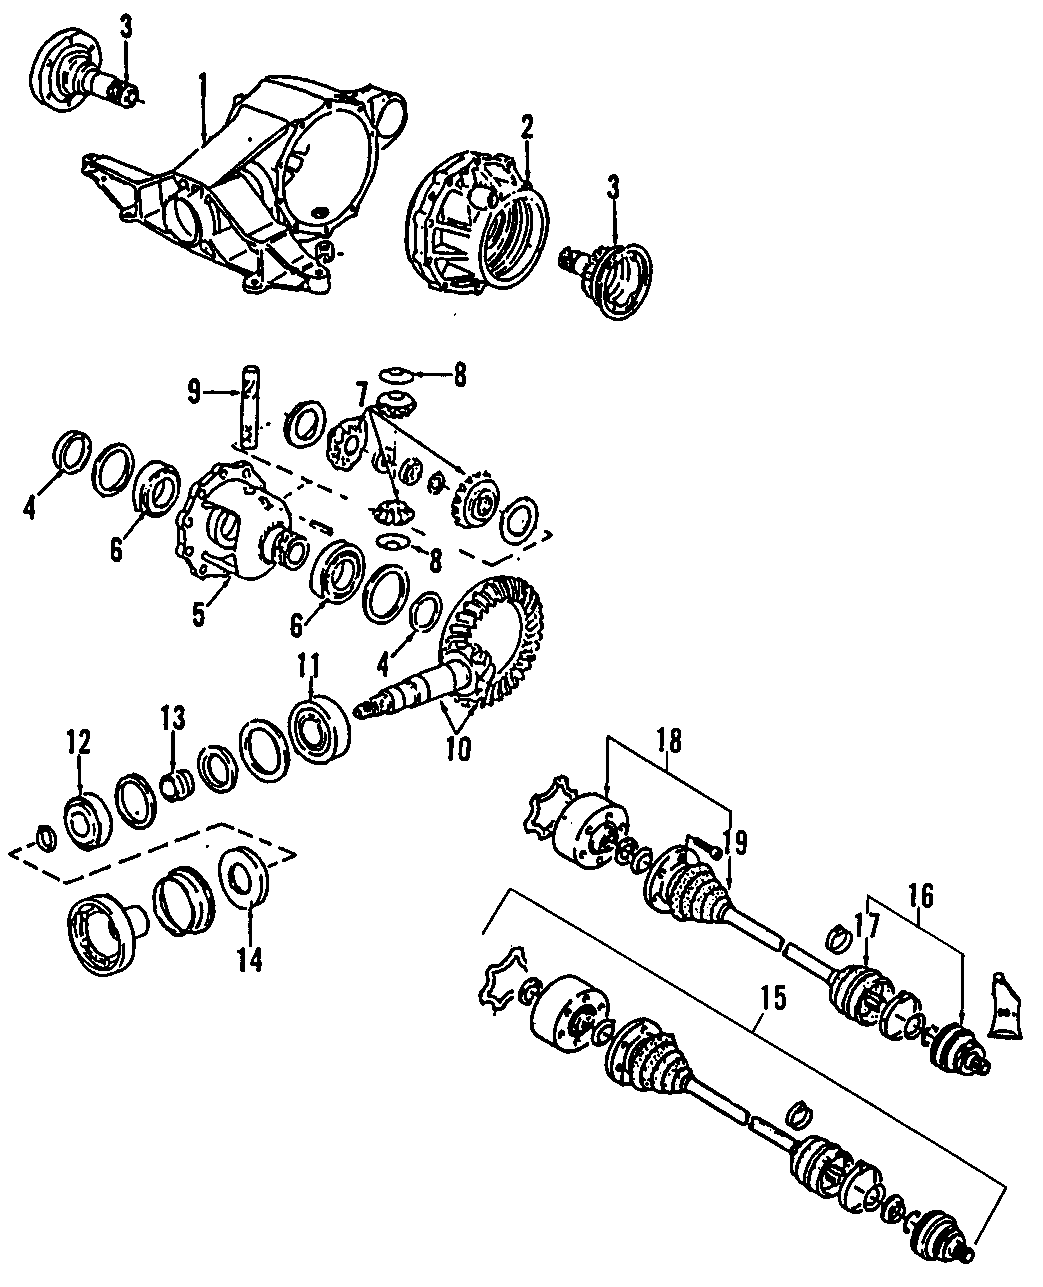 DRIVE AXLES. REAR AXLE. AXLE SHAFTS & JOINTS. DIFFERENTIAL. PROPELLER SHAFT.https://images.simplepart.com/images/parts/motor/fullsize/F207090.png